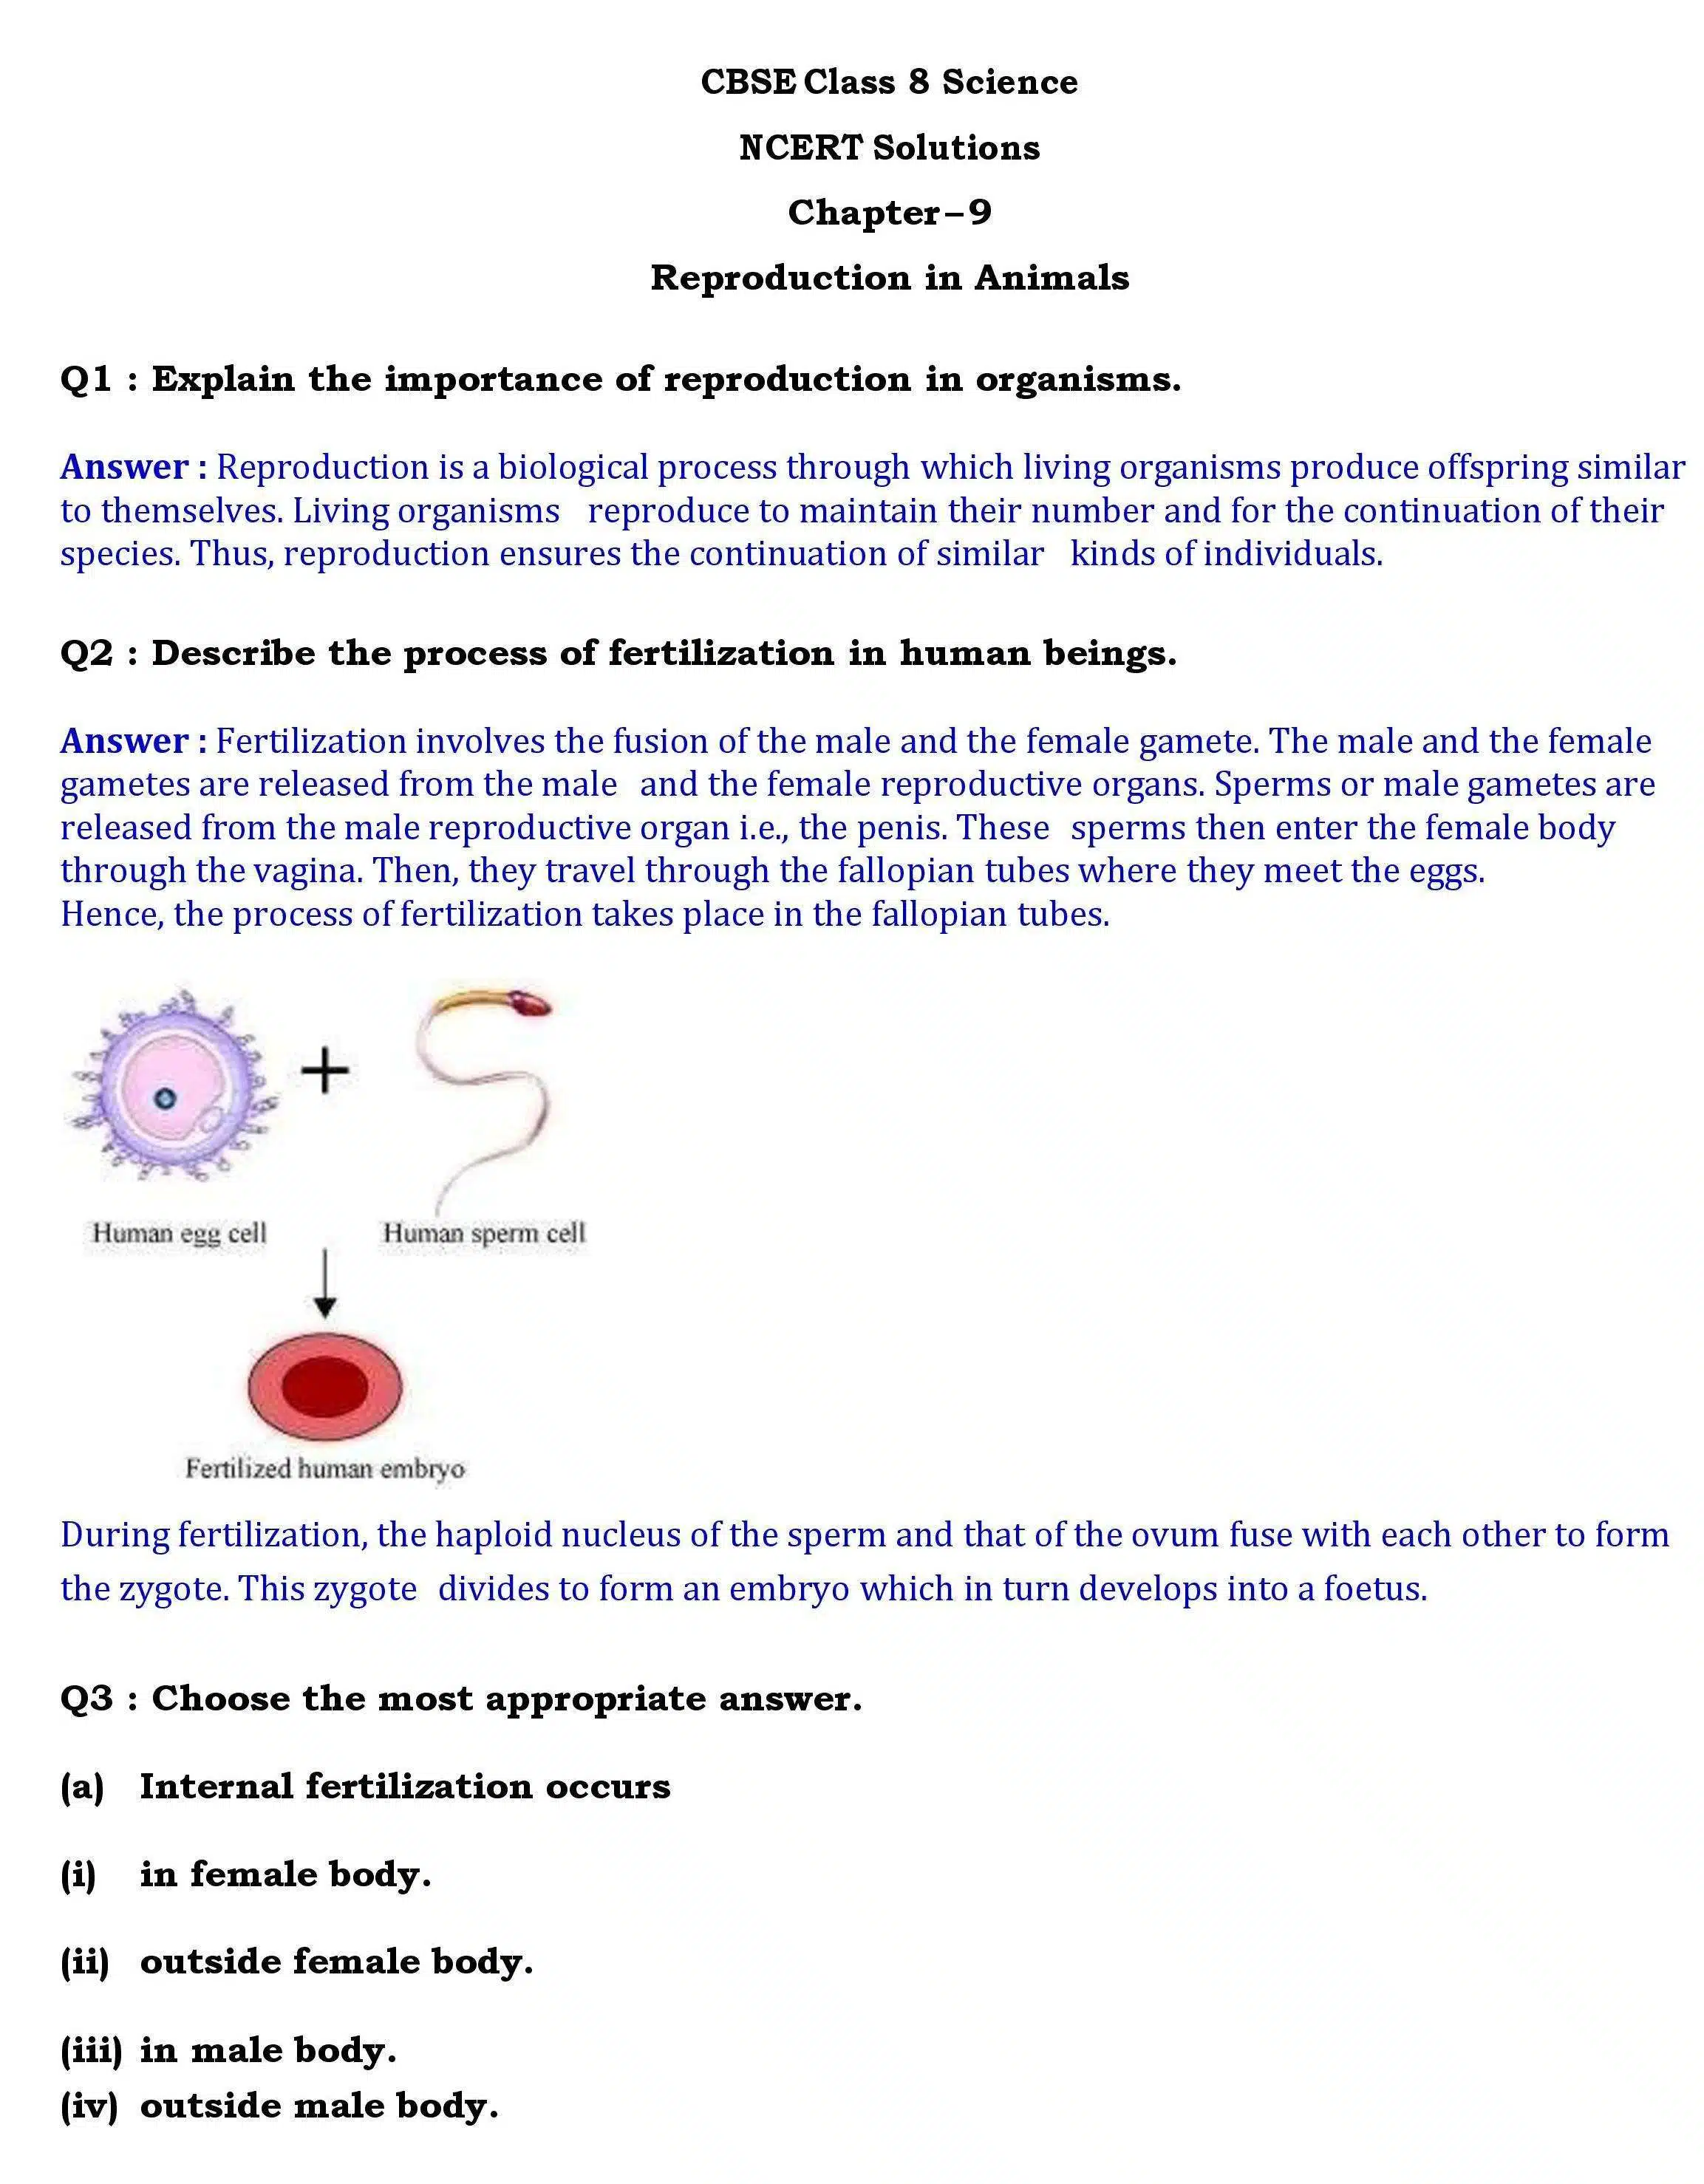 NCERT Solutions for Class 8 Science Chapter 9 page 001 scaled